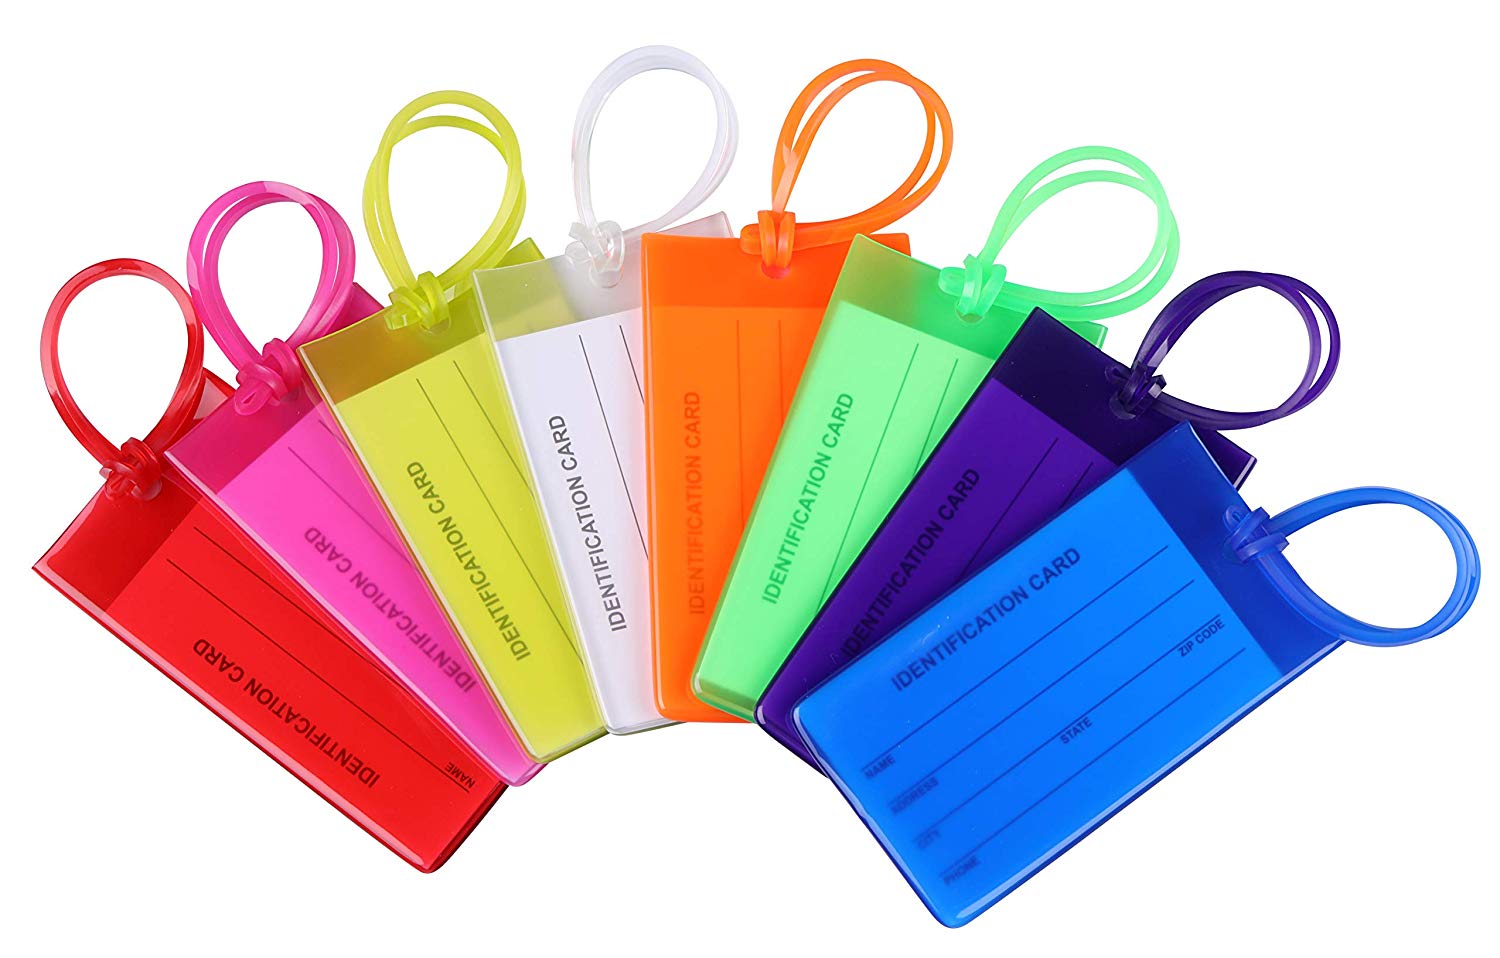 8 Pcs Luggage Tags, with Strings, Name ID Card for Travel Suitcase, Baggage, Bag, Backpack, Silicone, Multicolored - image 2 of 5